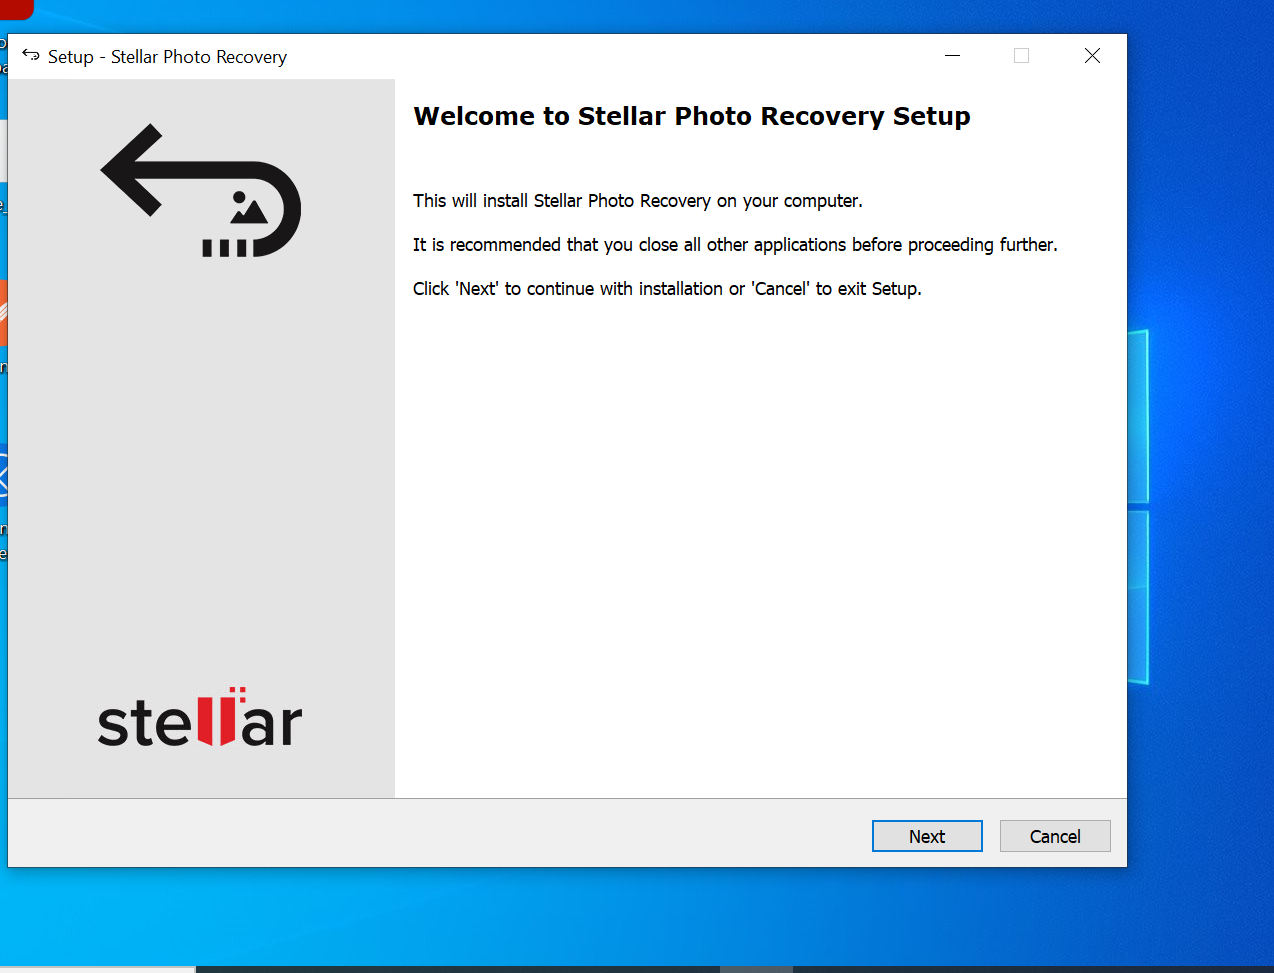 Installing Stellar Photo Recovery Software